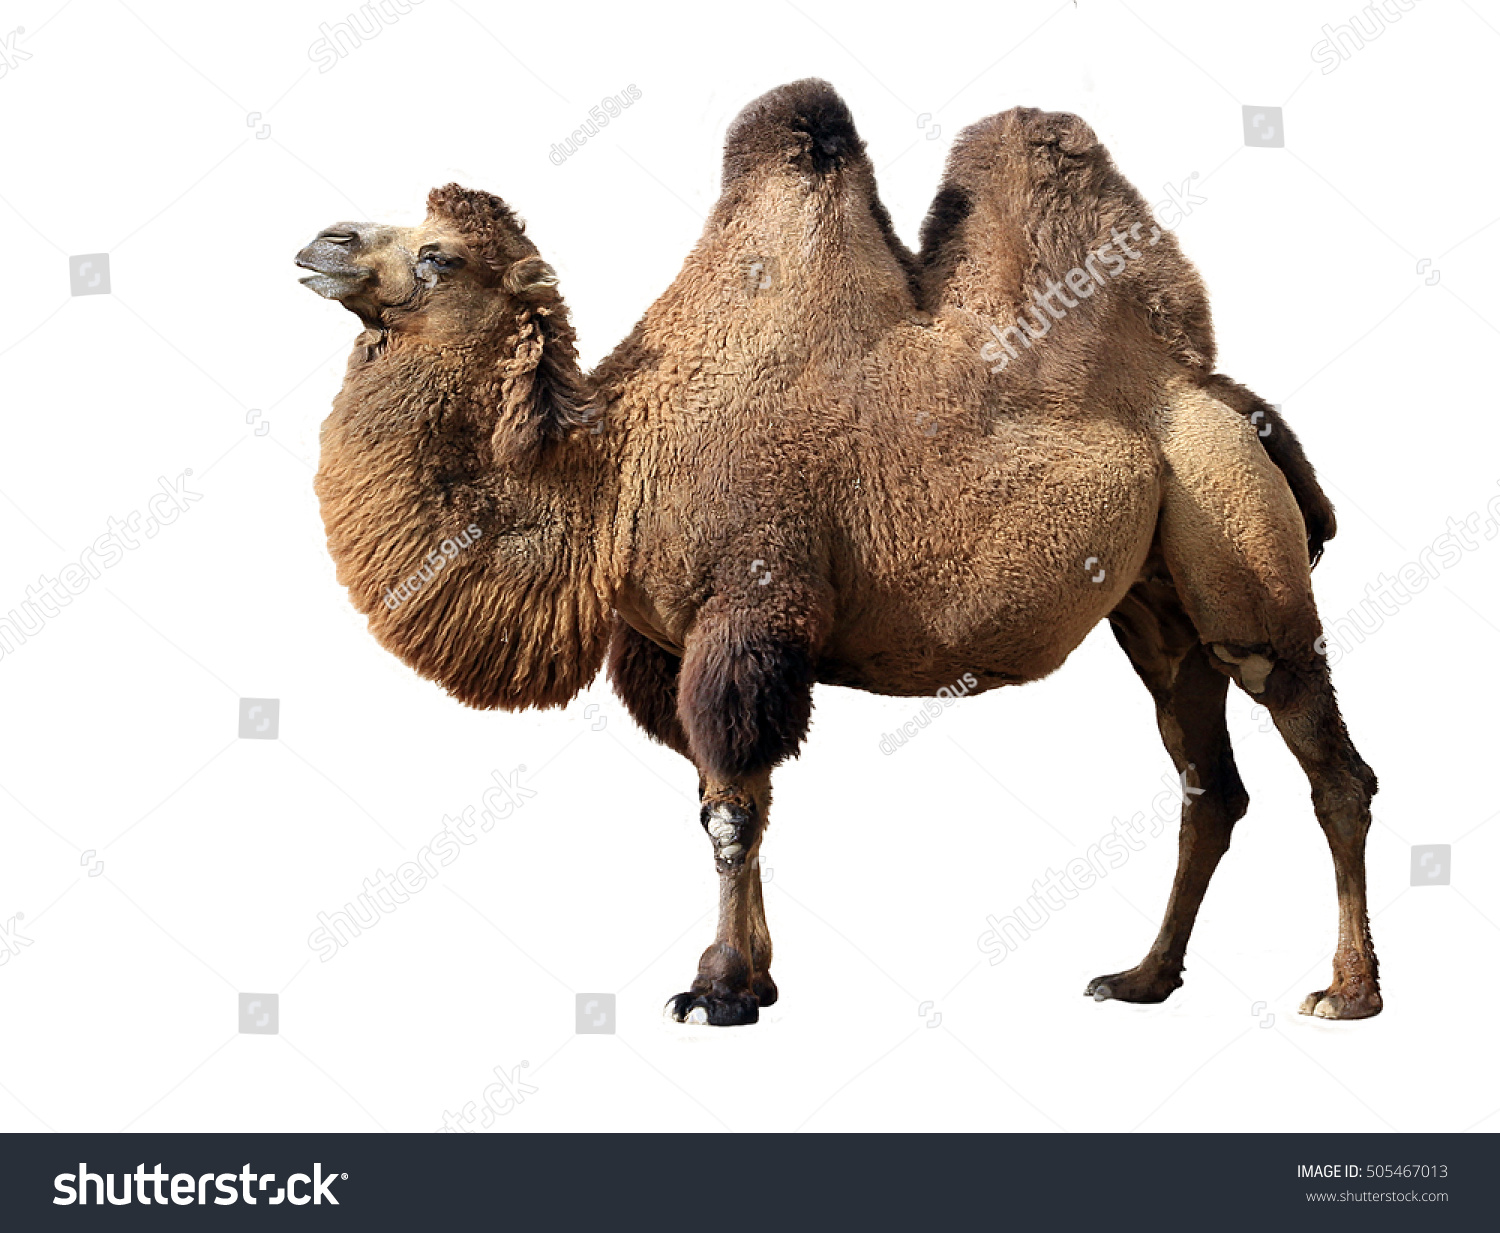 Bactrian camel on white background #505467013